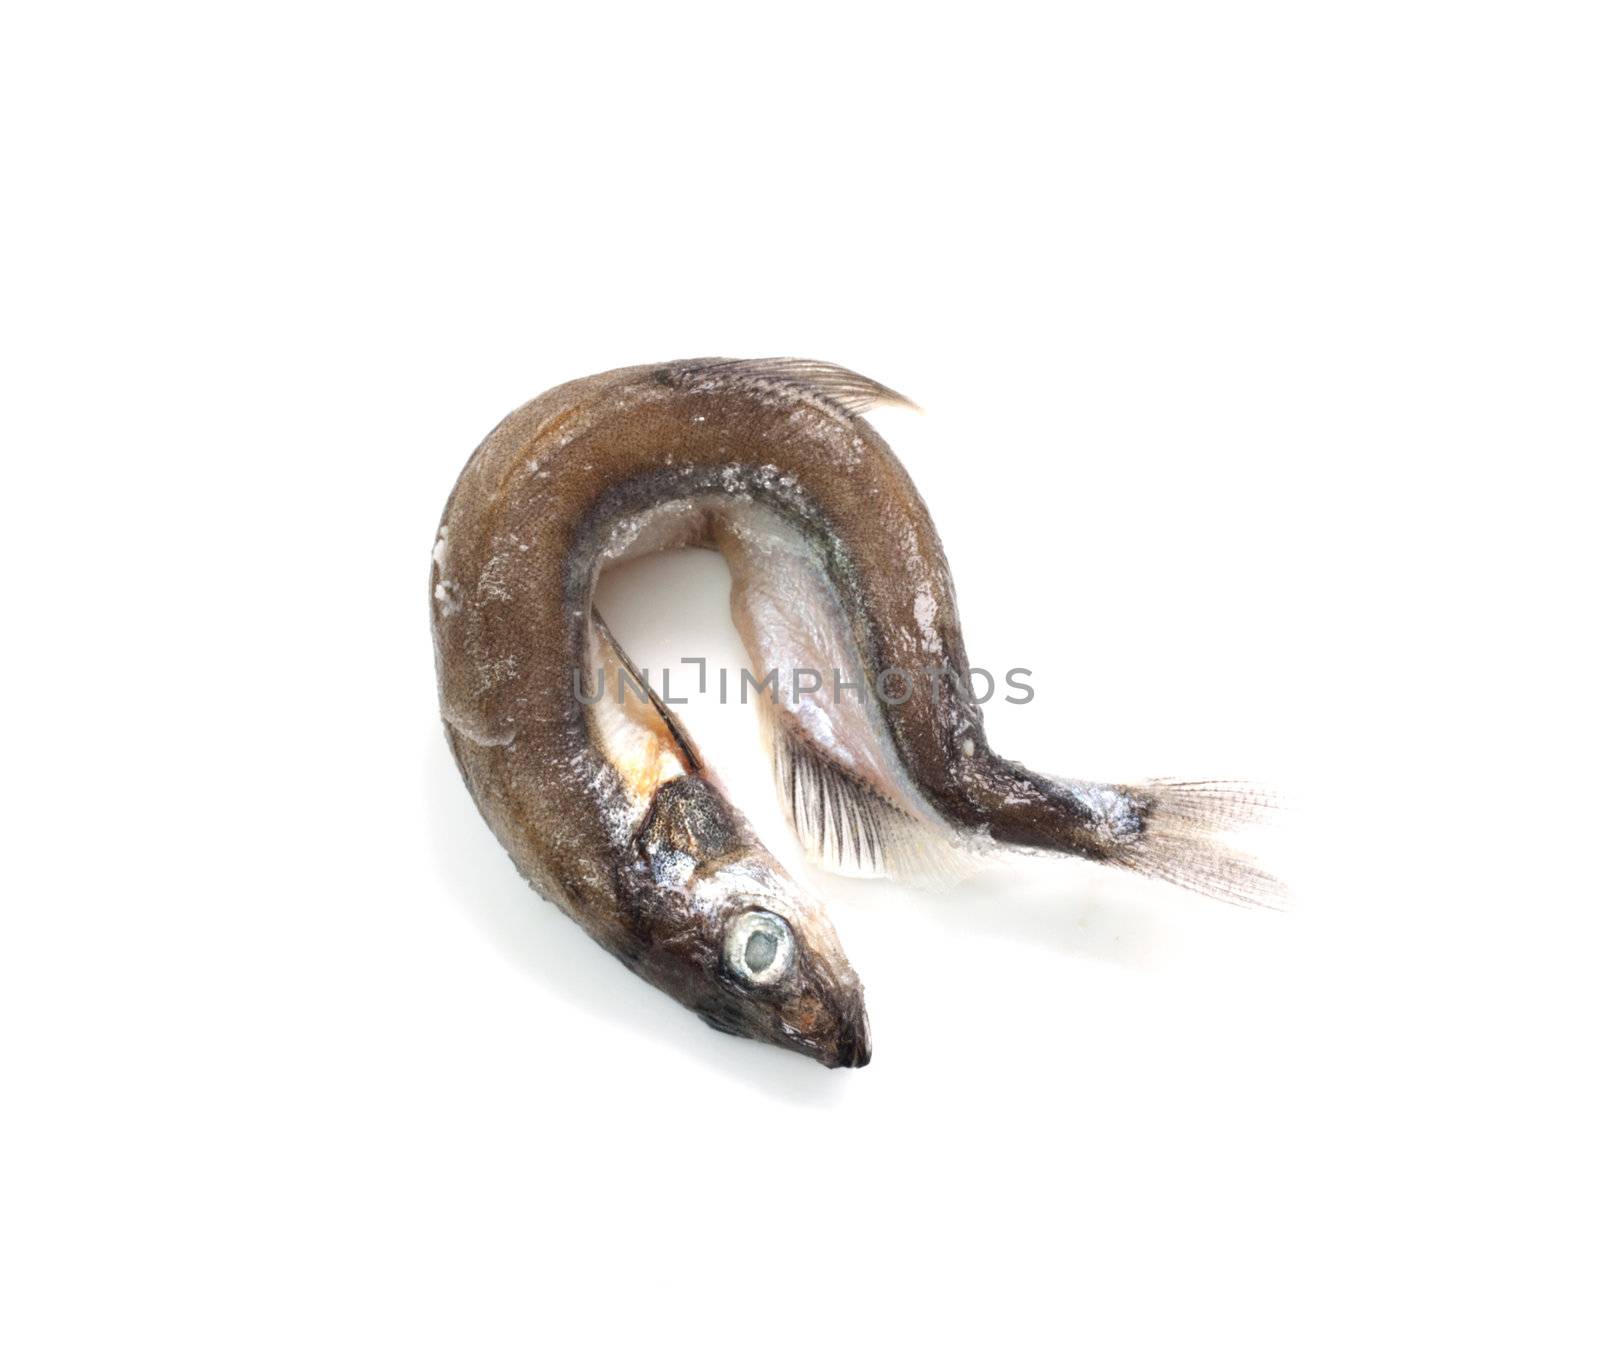 Capelin fish isolated on the white background  by schankz